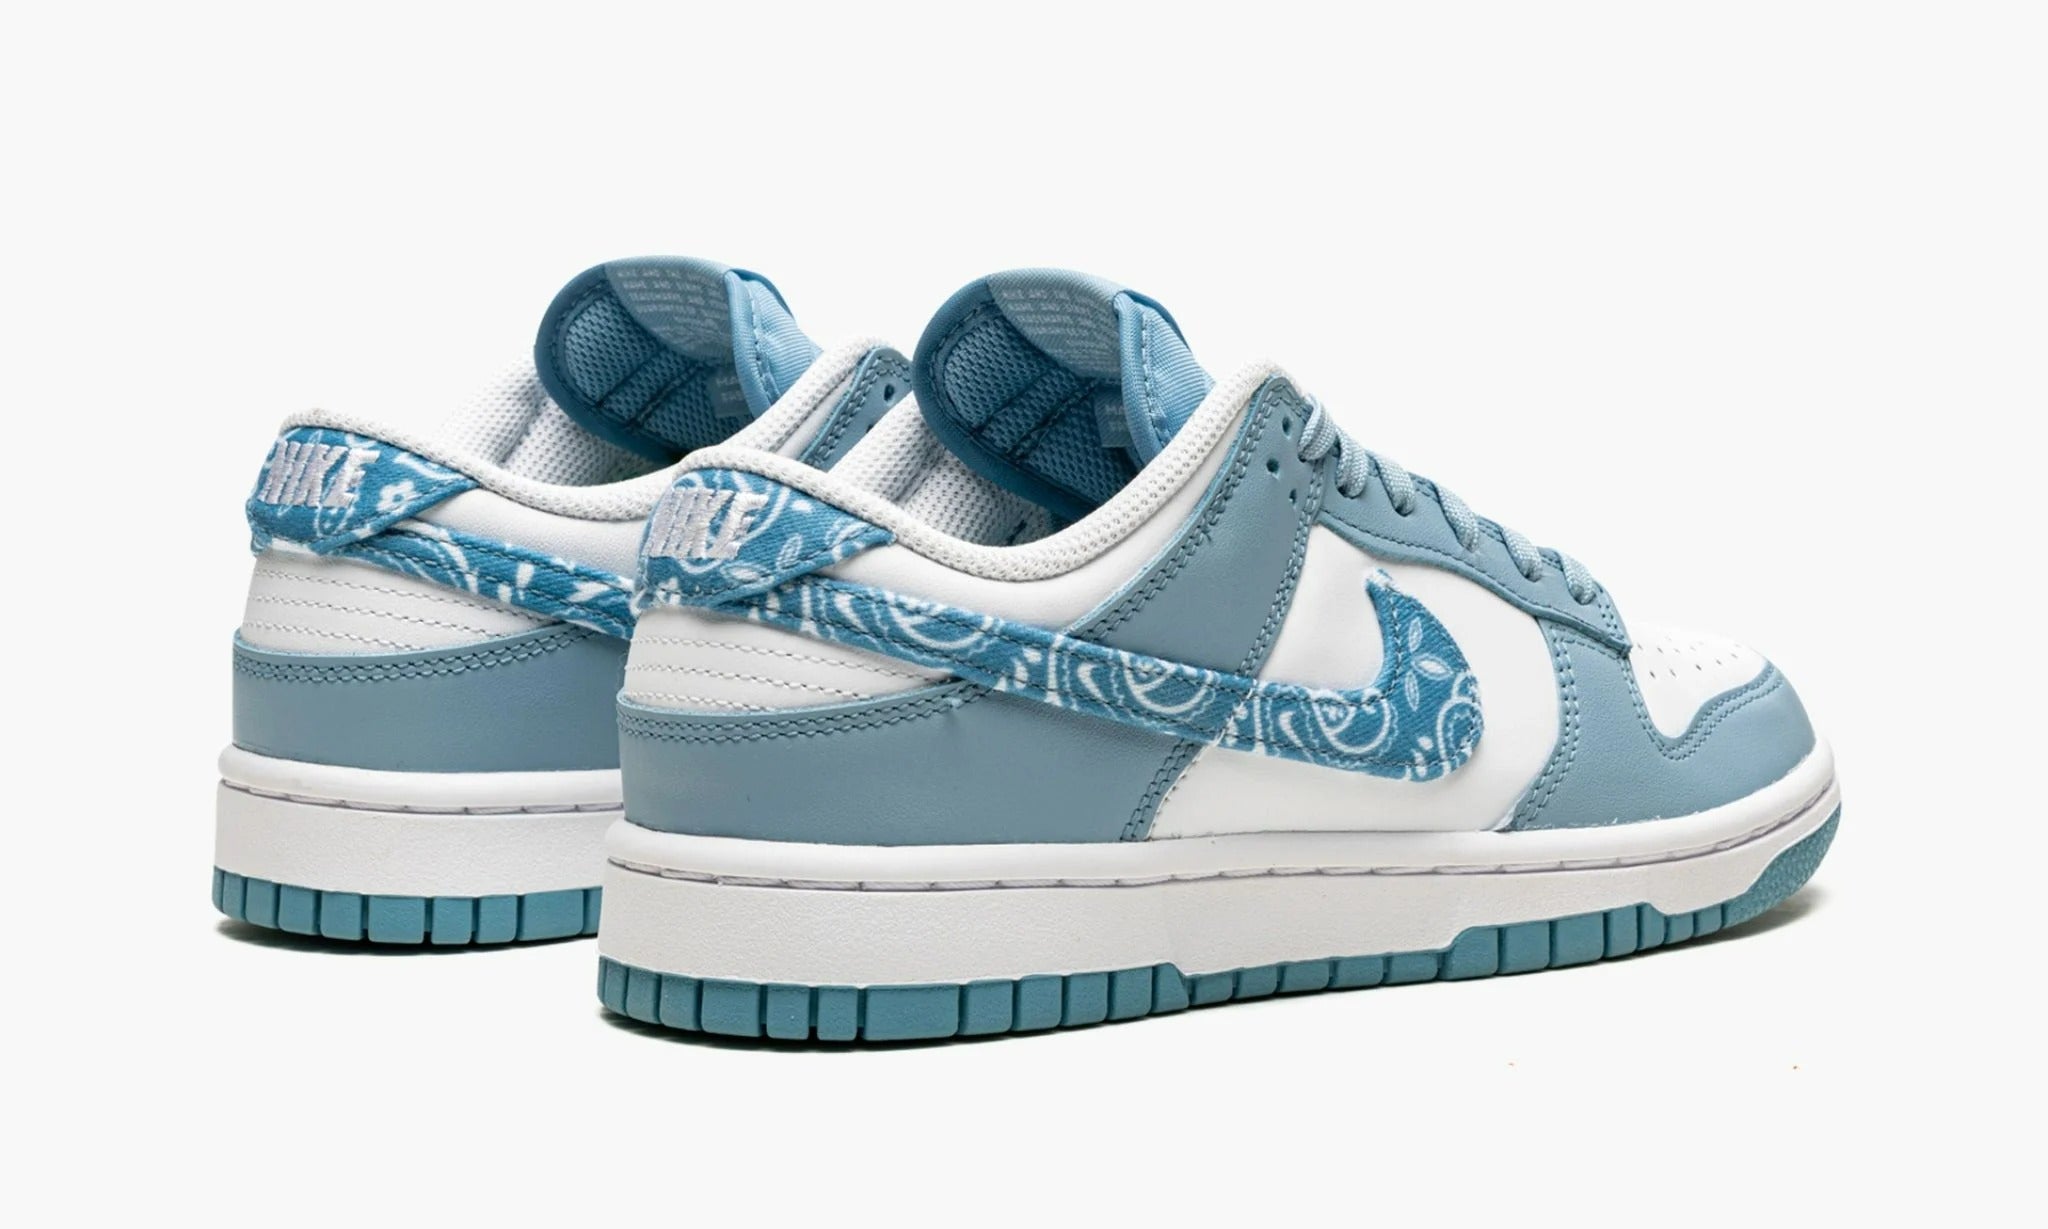 Dunk Low Essential Paisley Pack Worn Blue - DH4401 101 – The Sortage